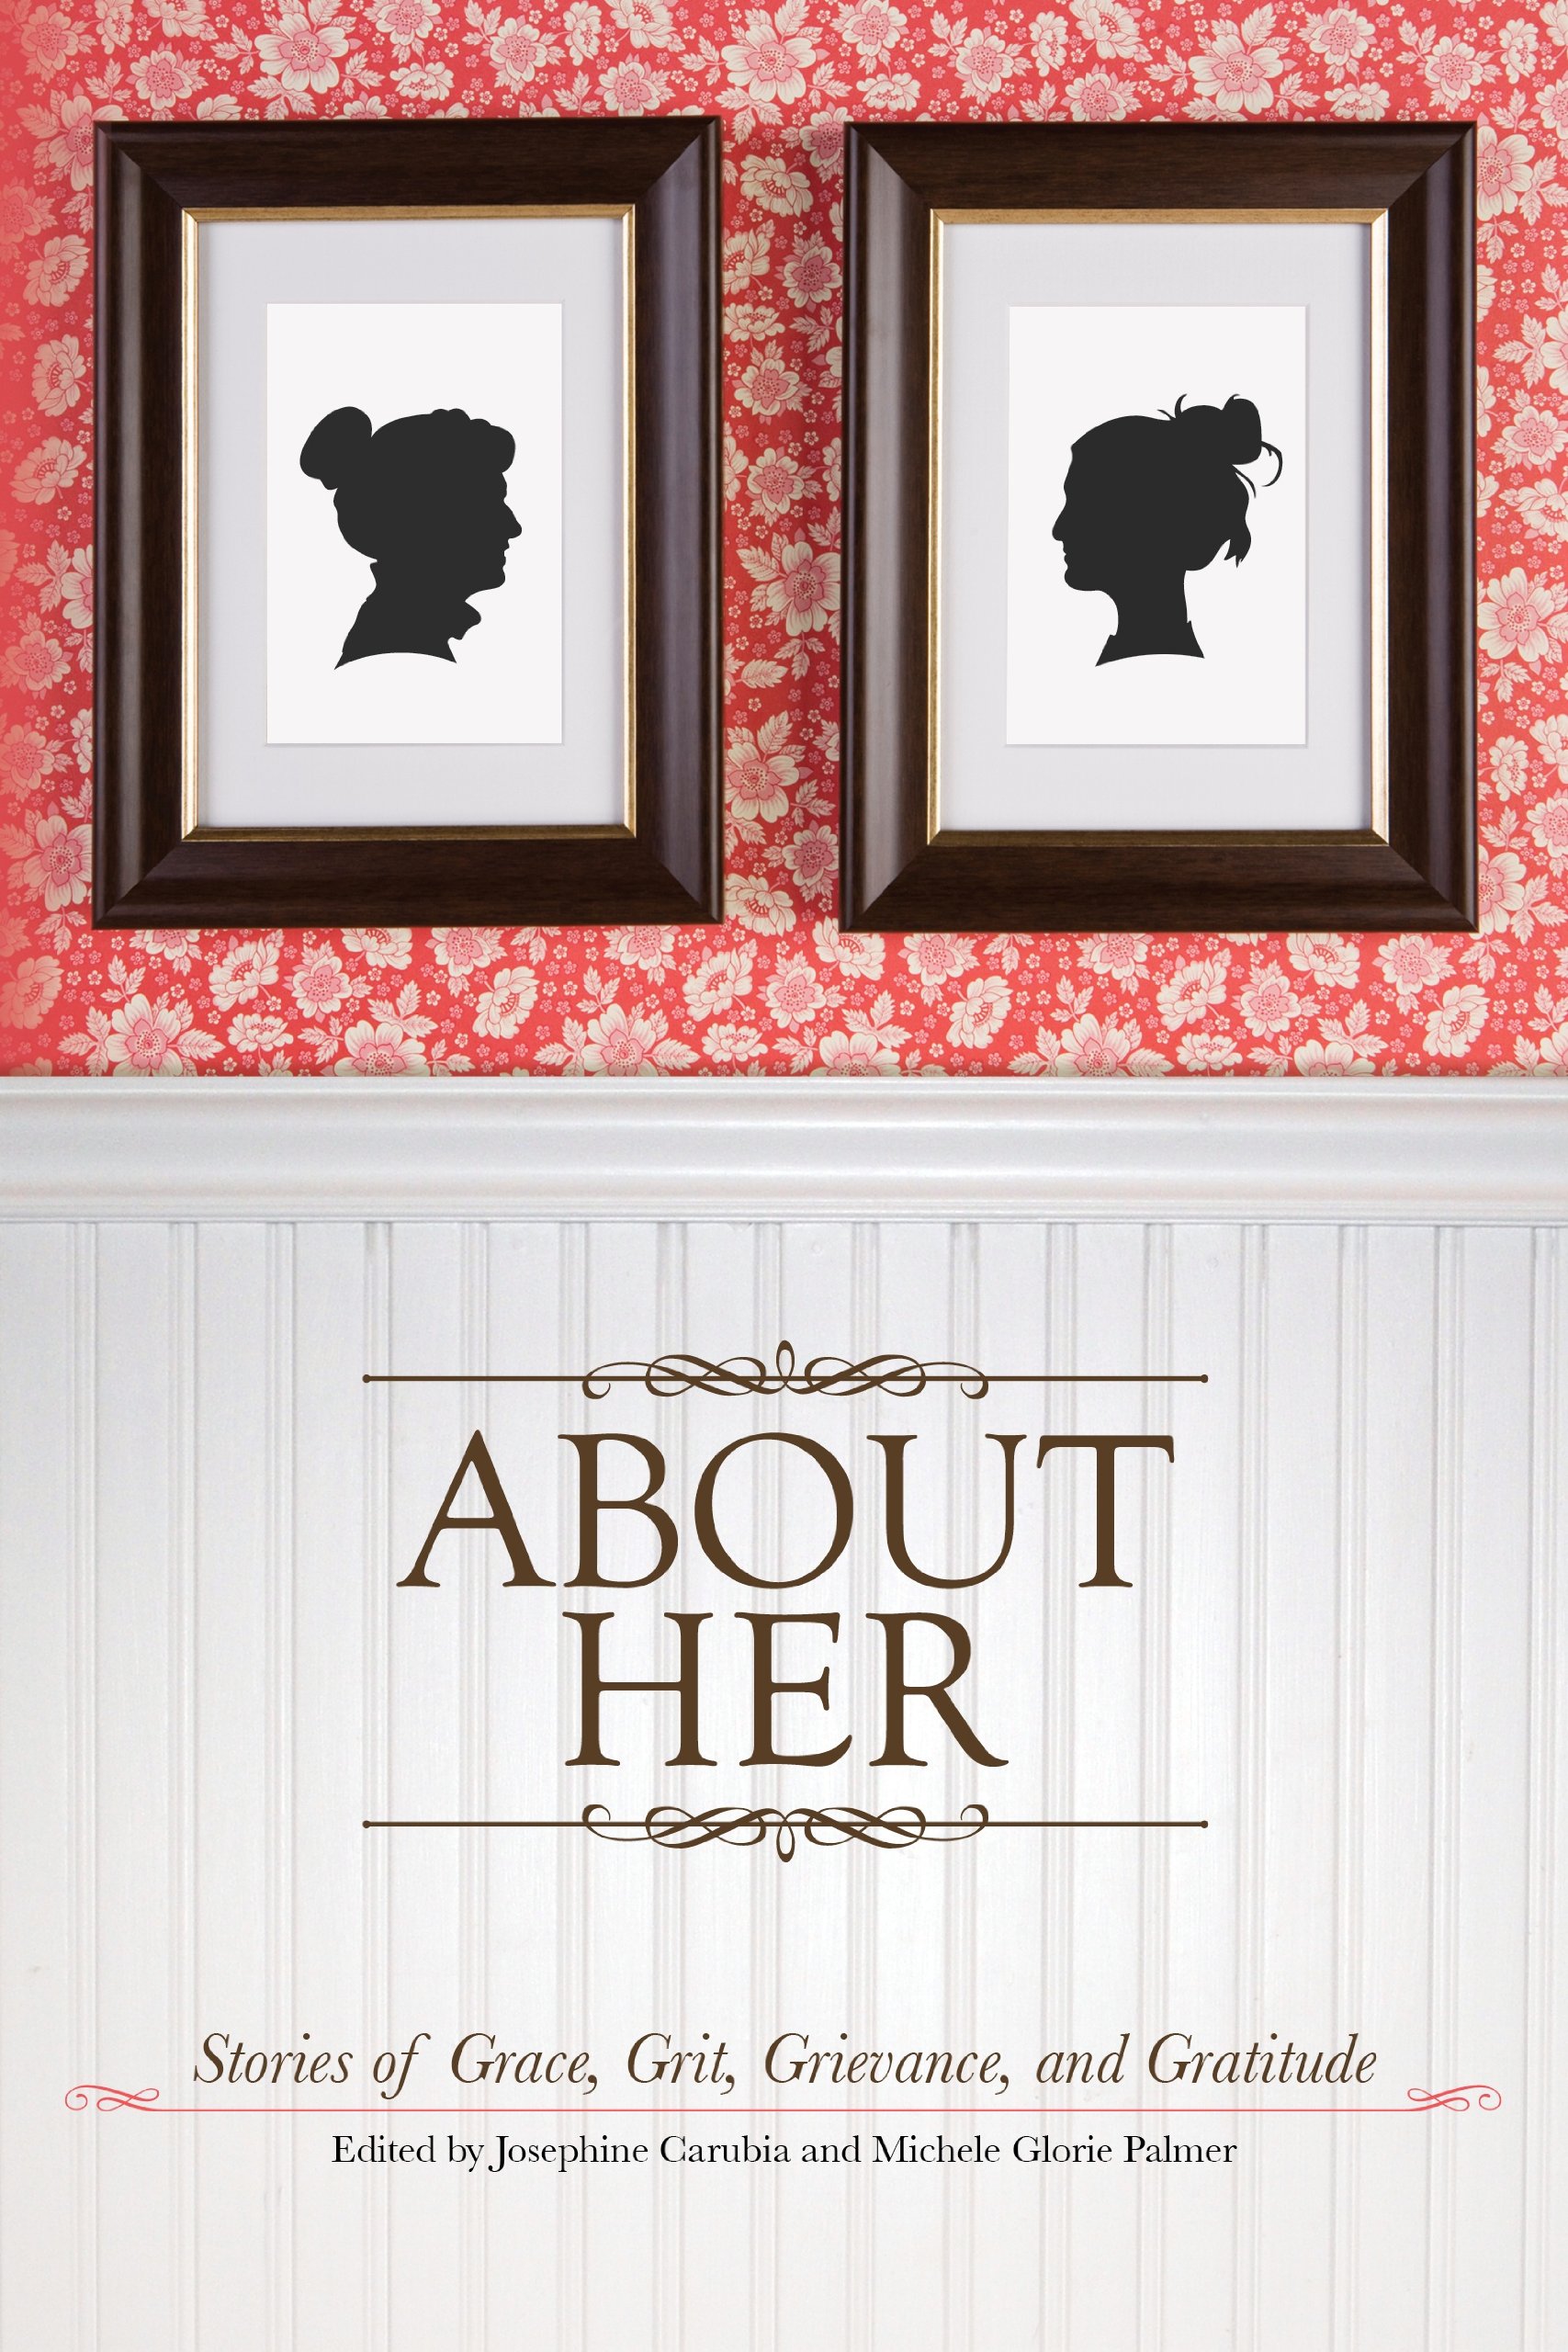 About Her: Stories of Grace, Grit and Grievance